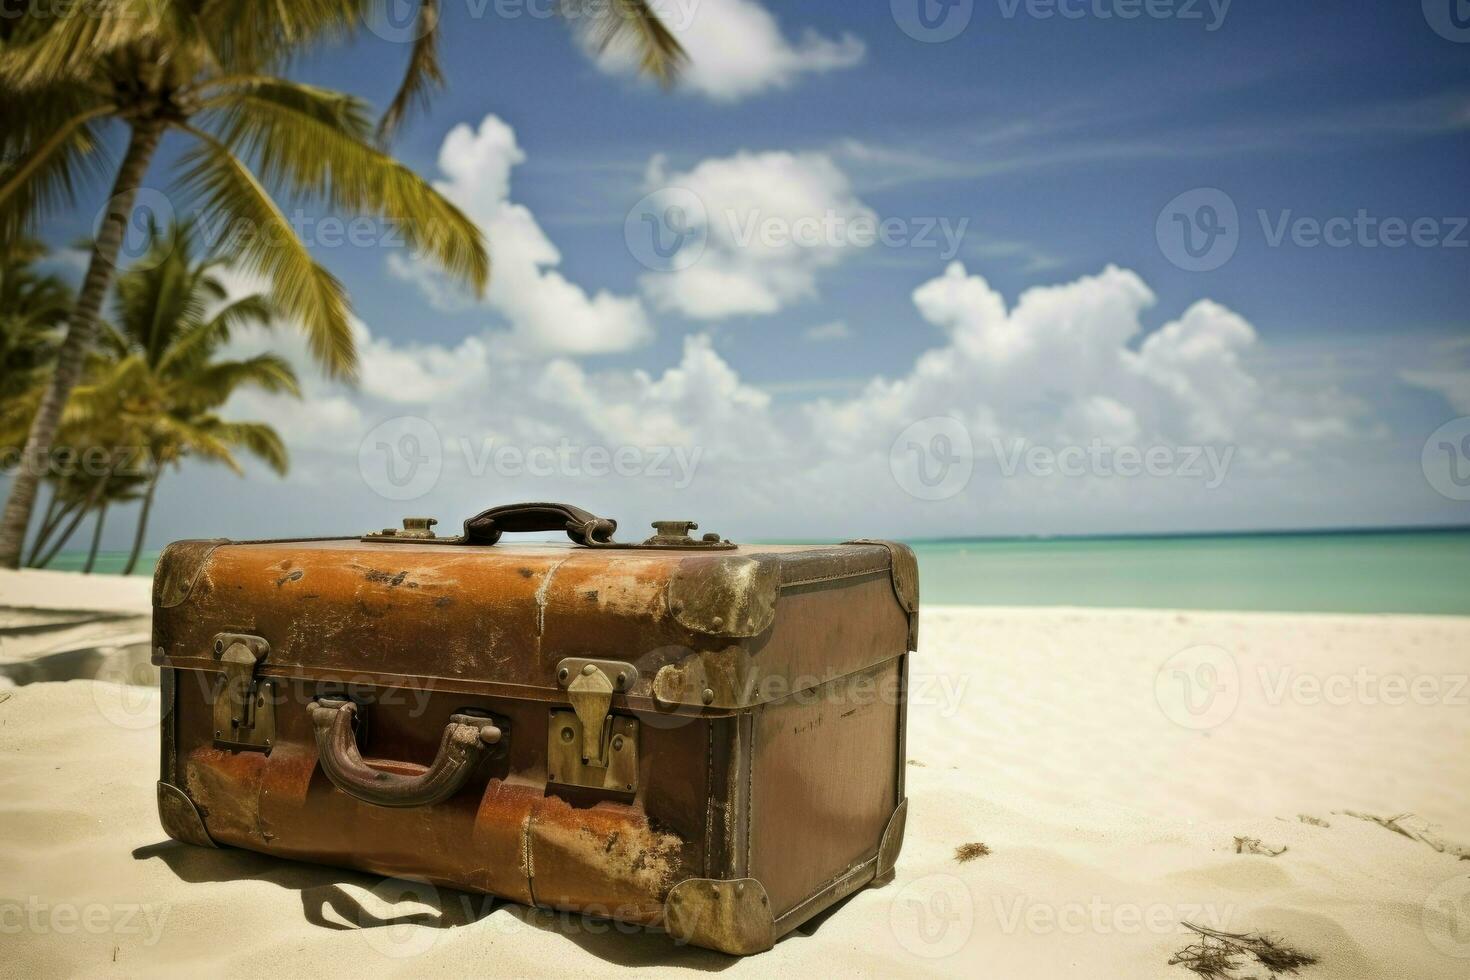 Suitcase tropical beach sand. Generate Ai 23440752 Stock Photo at Vecteezy